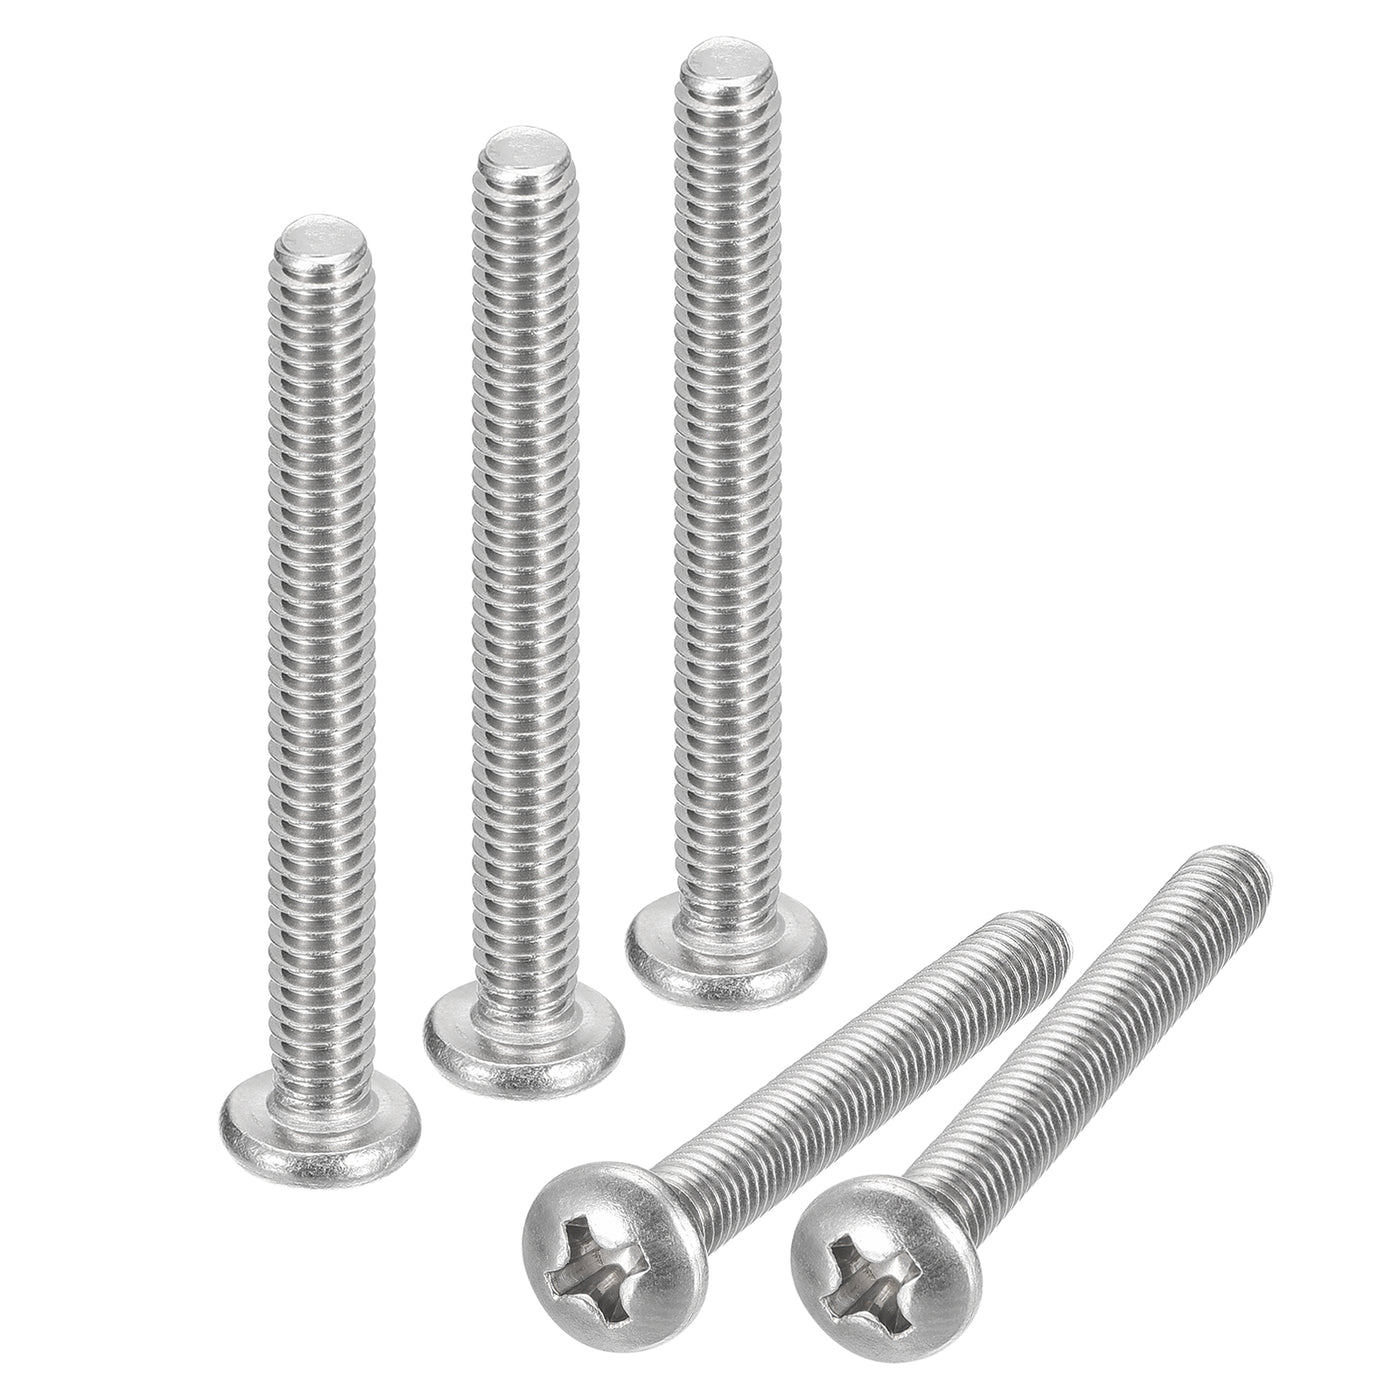 uxcell Uxcell #8-32x1-1/2" Pan Head Machine Screws, Stainless Steel 18-8 Screw, Pack of 20